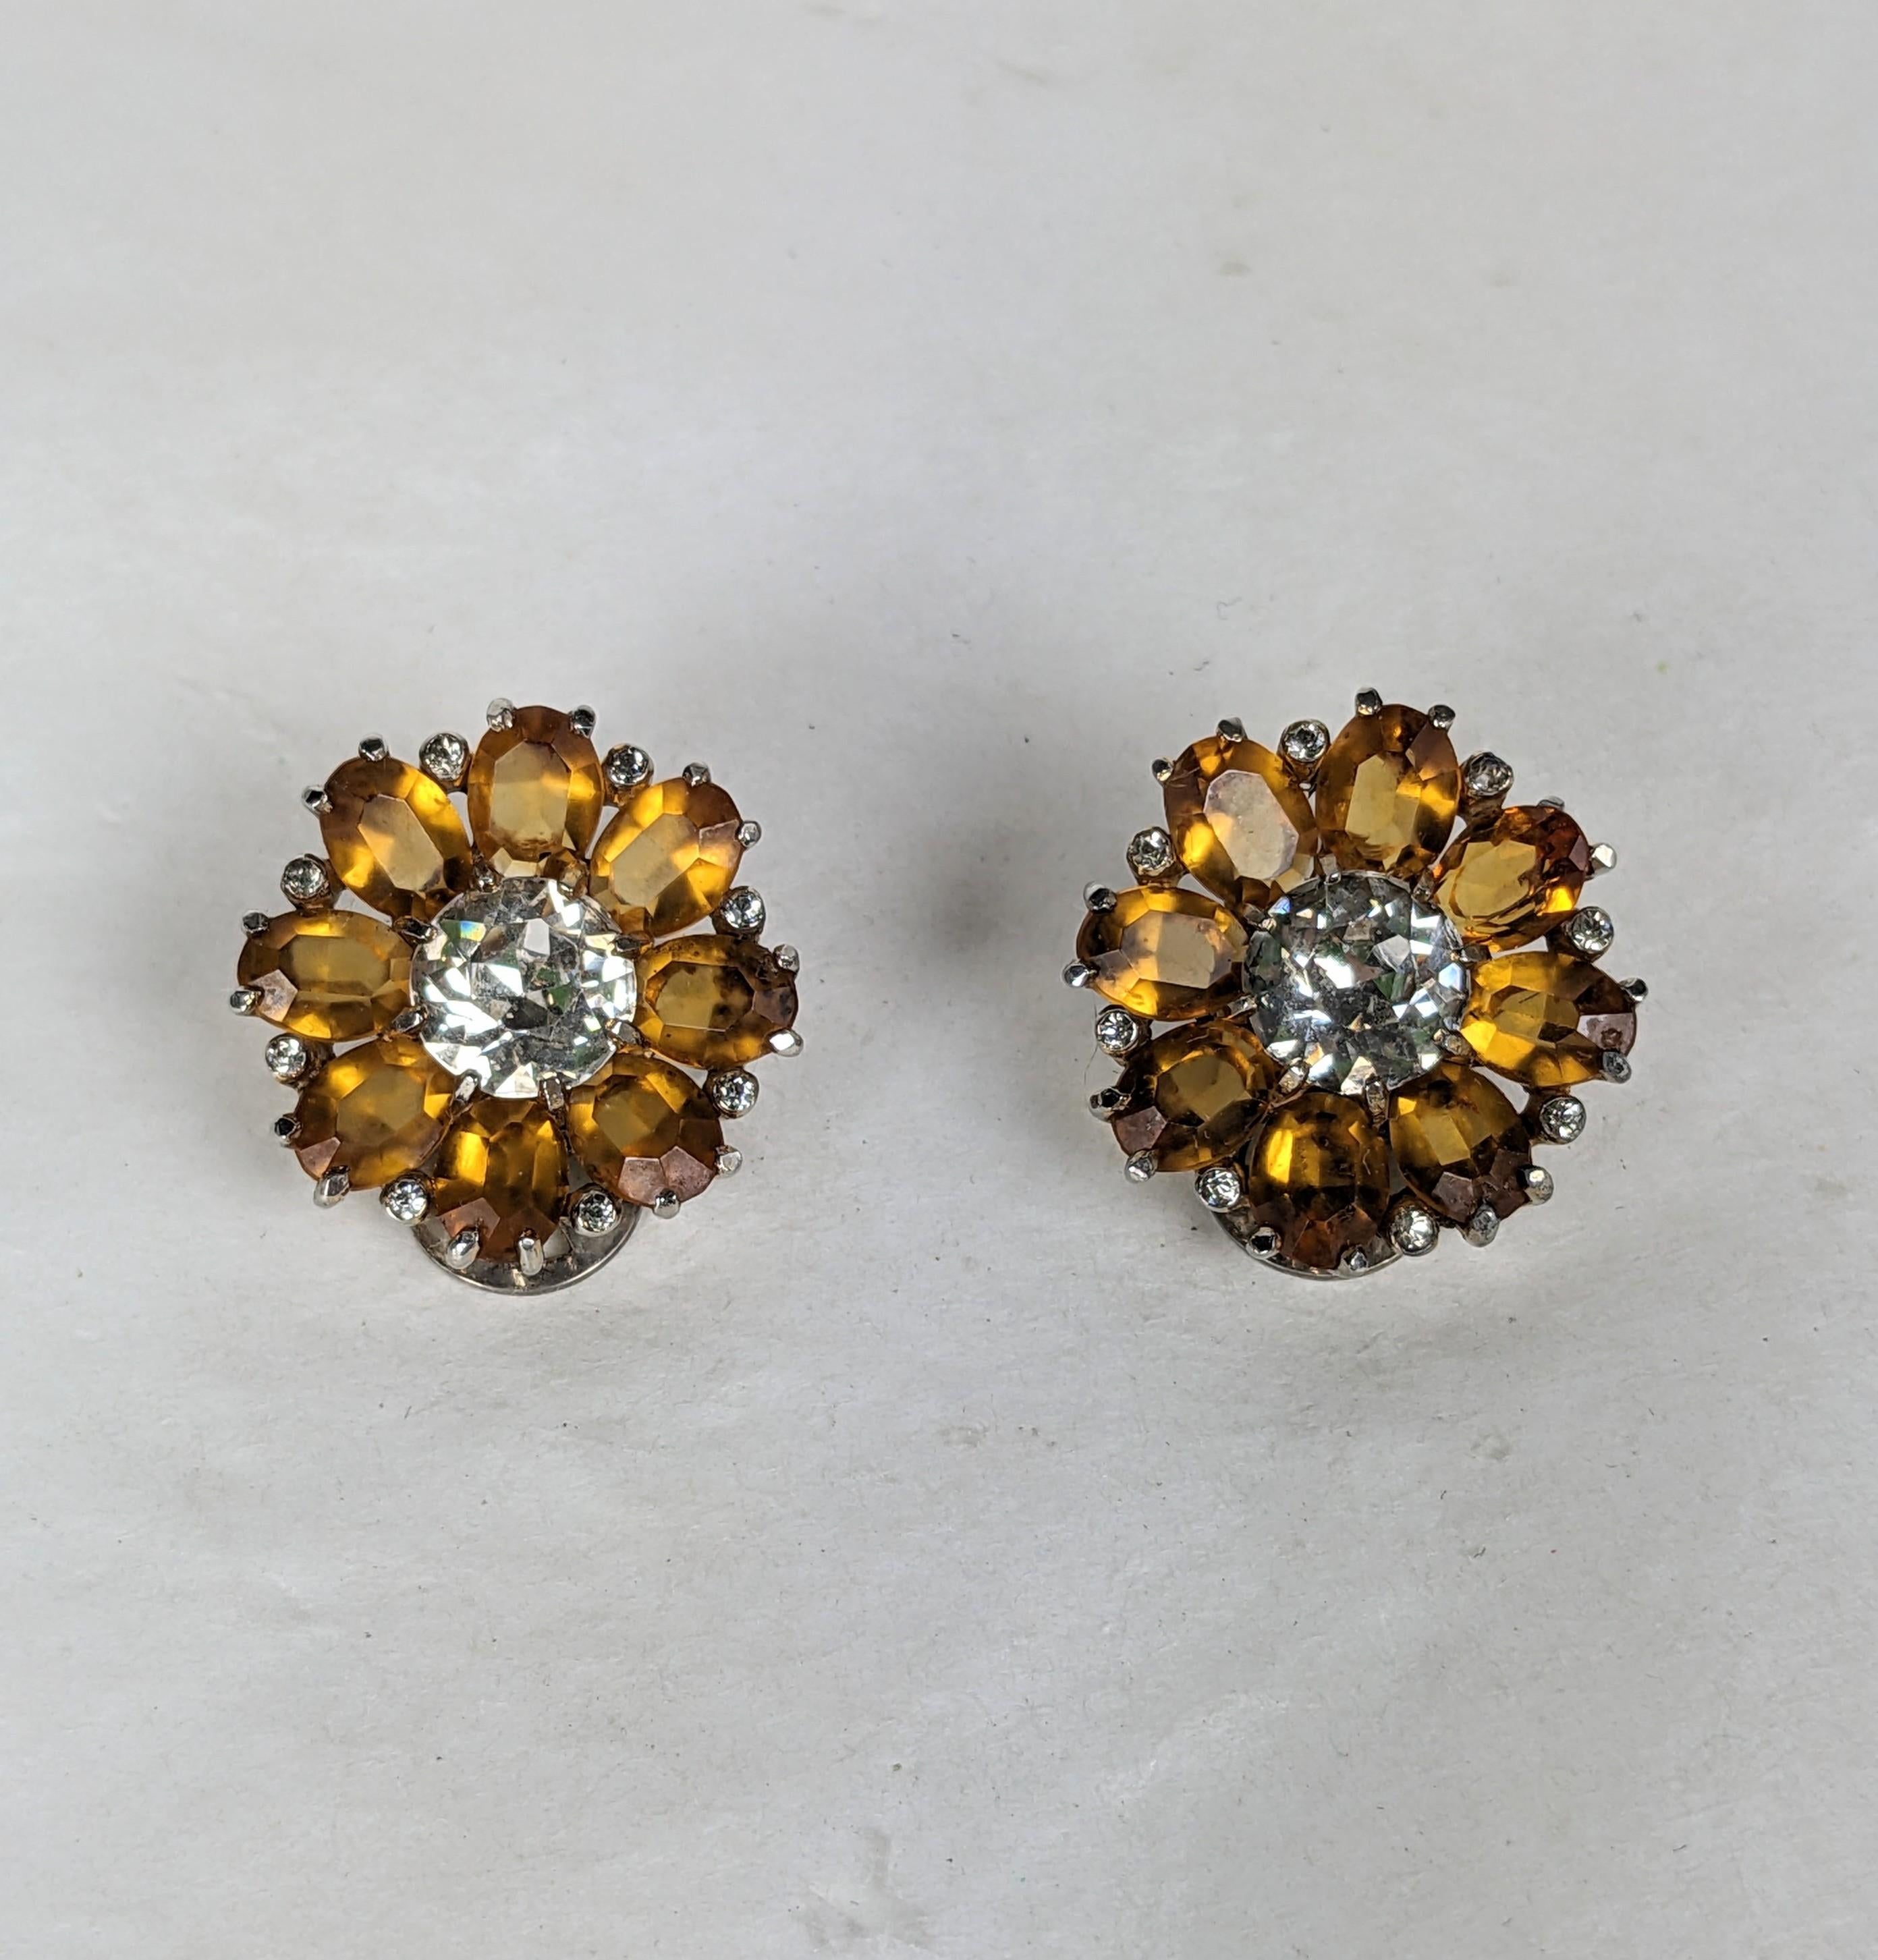 Mazer topaz flower head earclips of gold plated base metal, crystal rhinestones and oval faceted faux topaz stones. signed Mazer (on clips). L.75